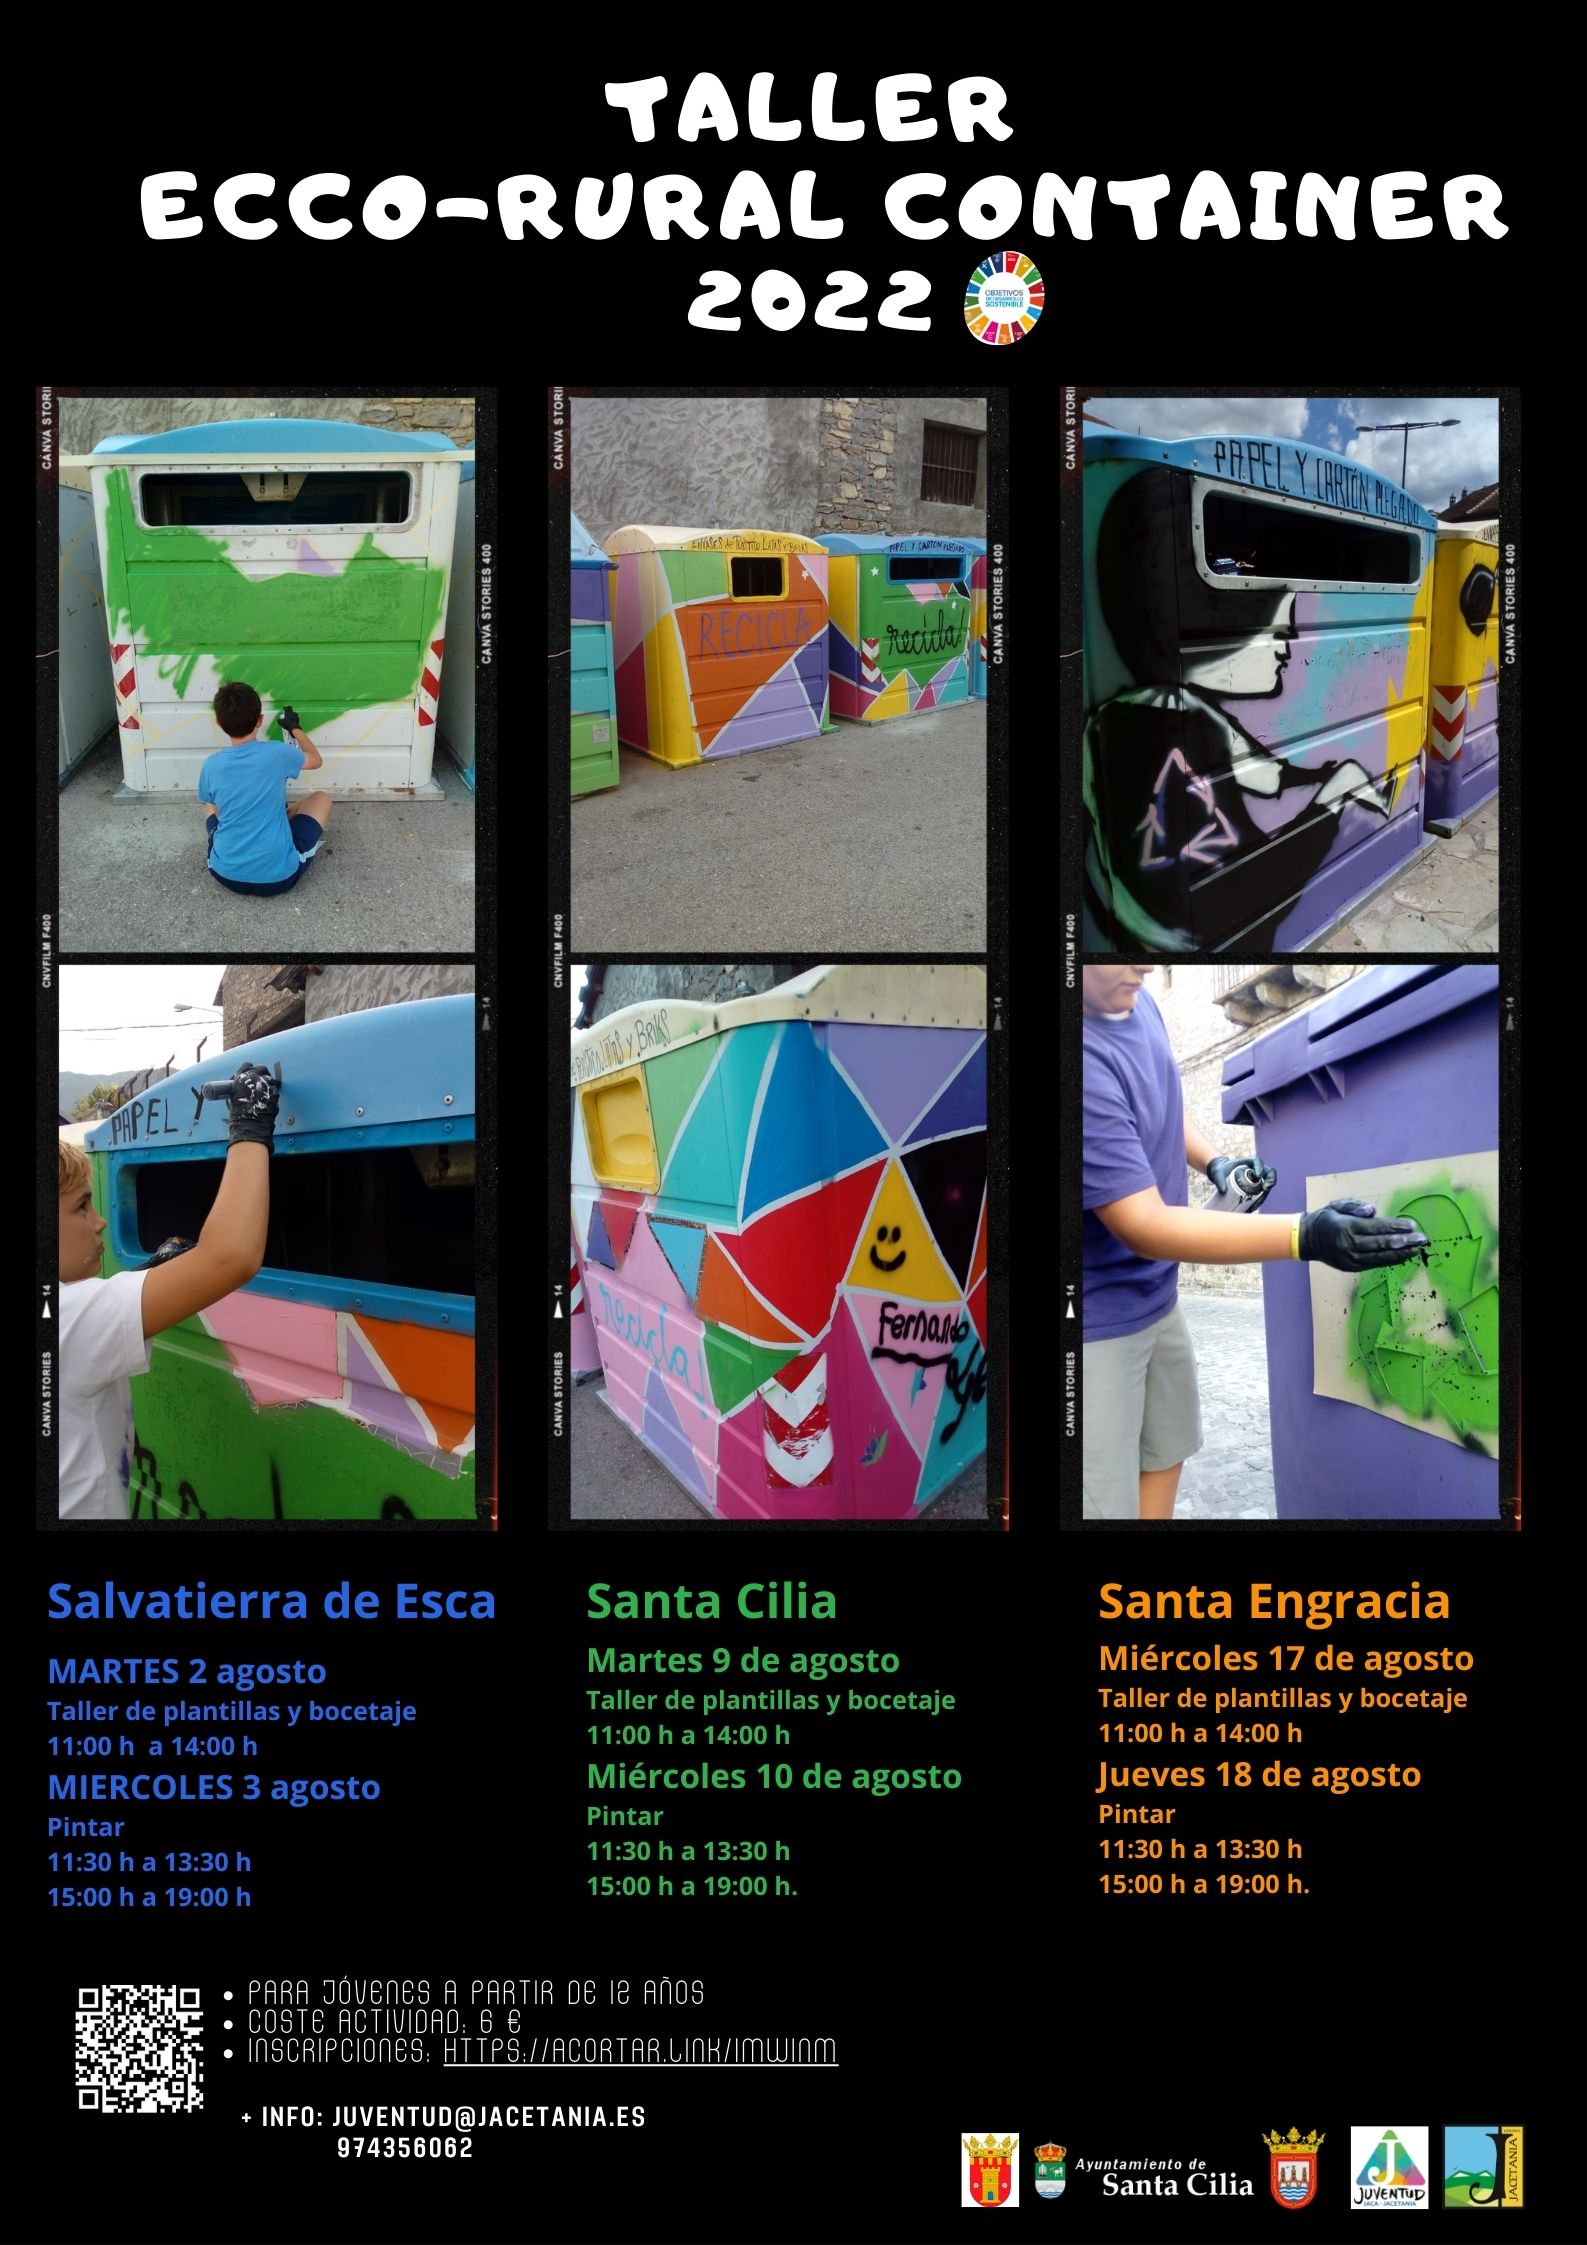 Taller Eco-Rural Container 2022